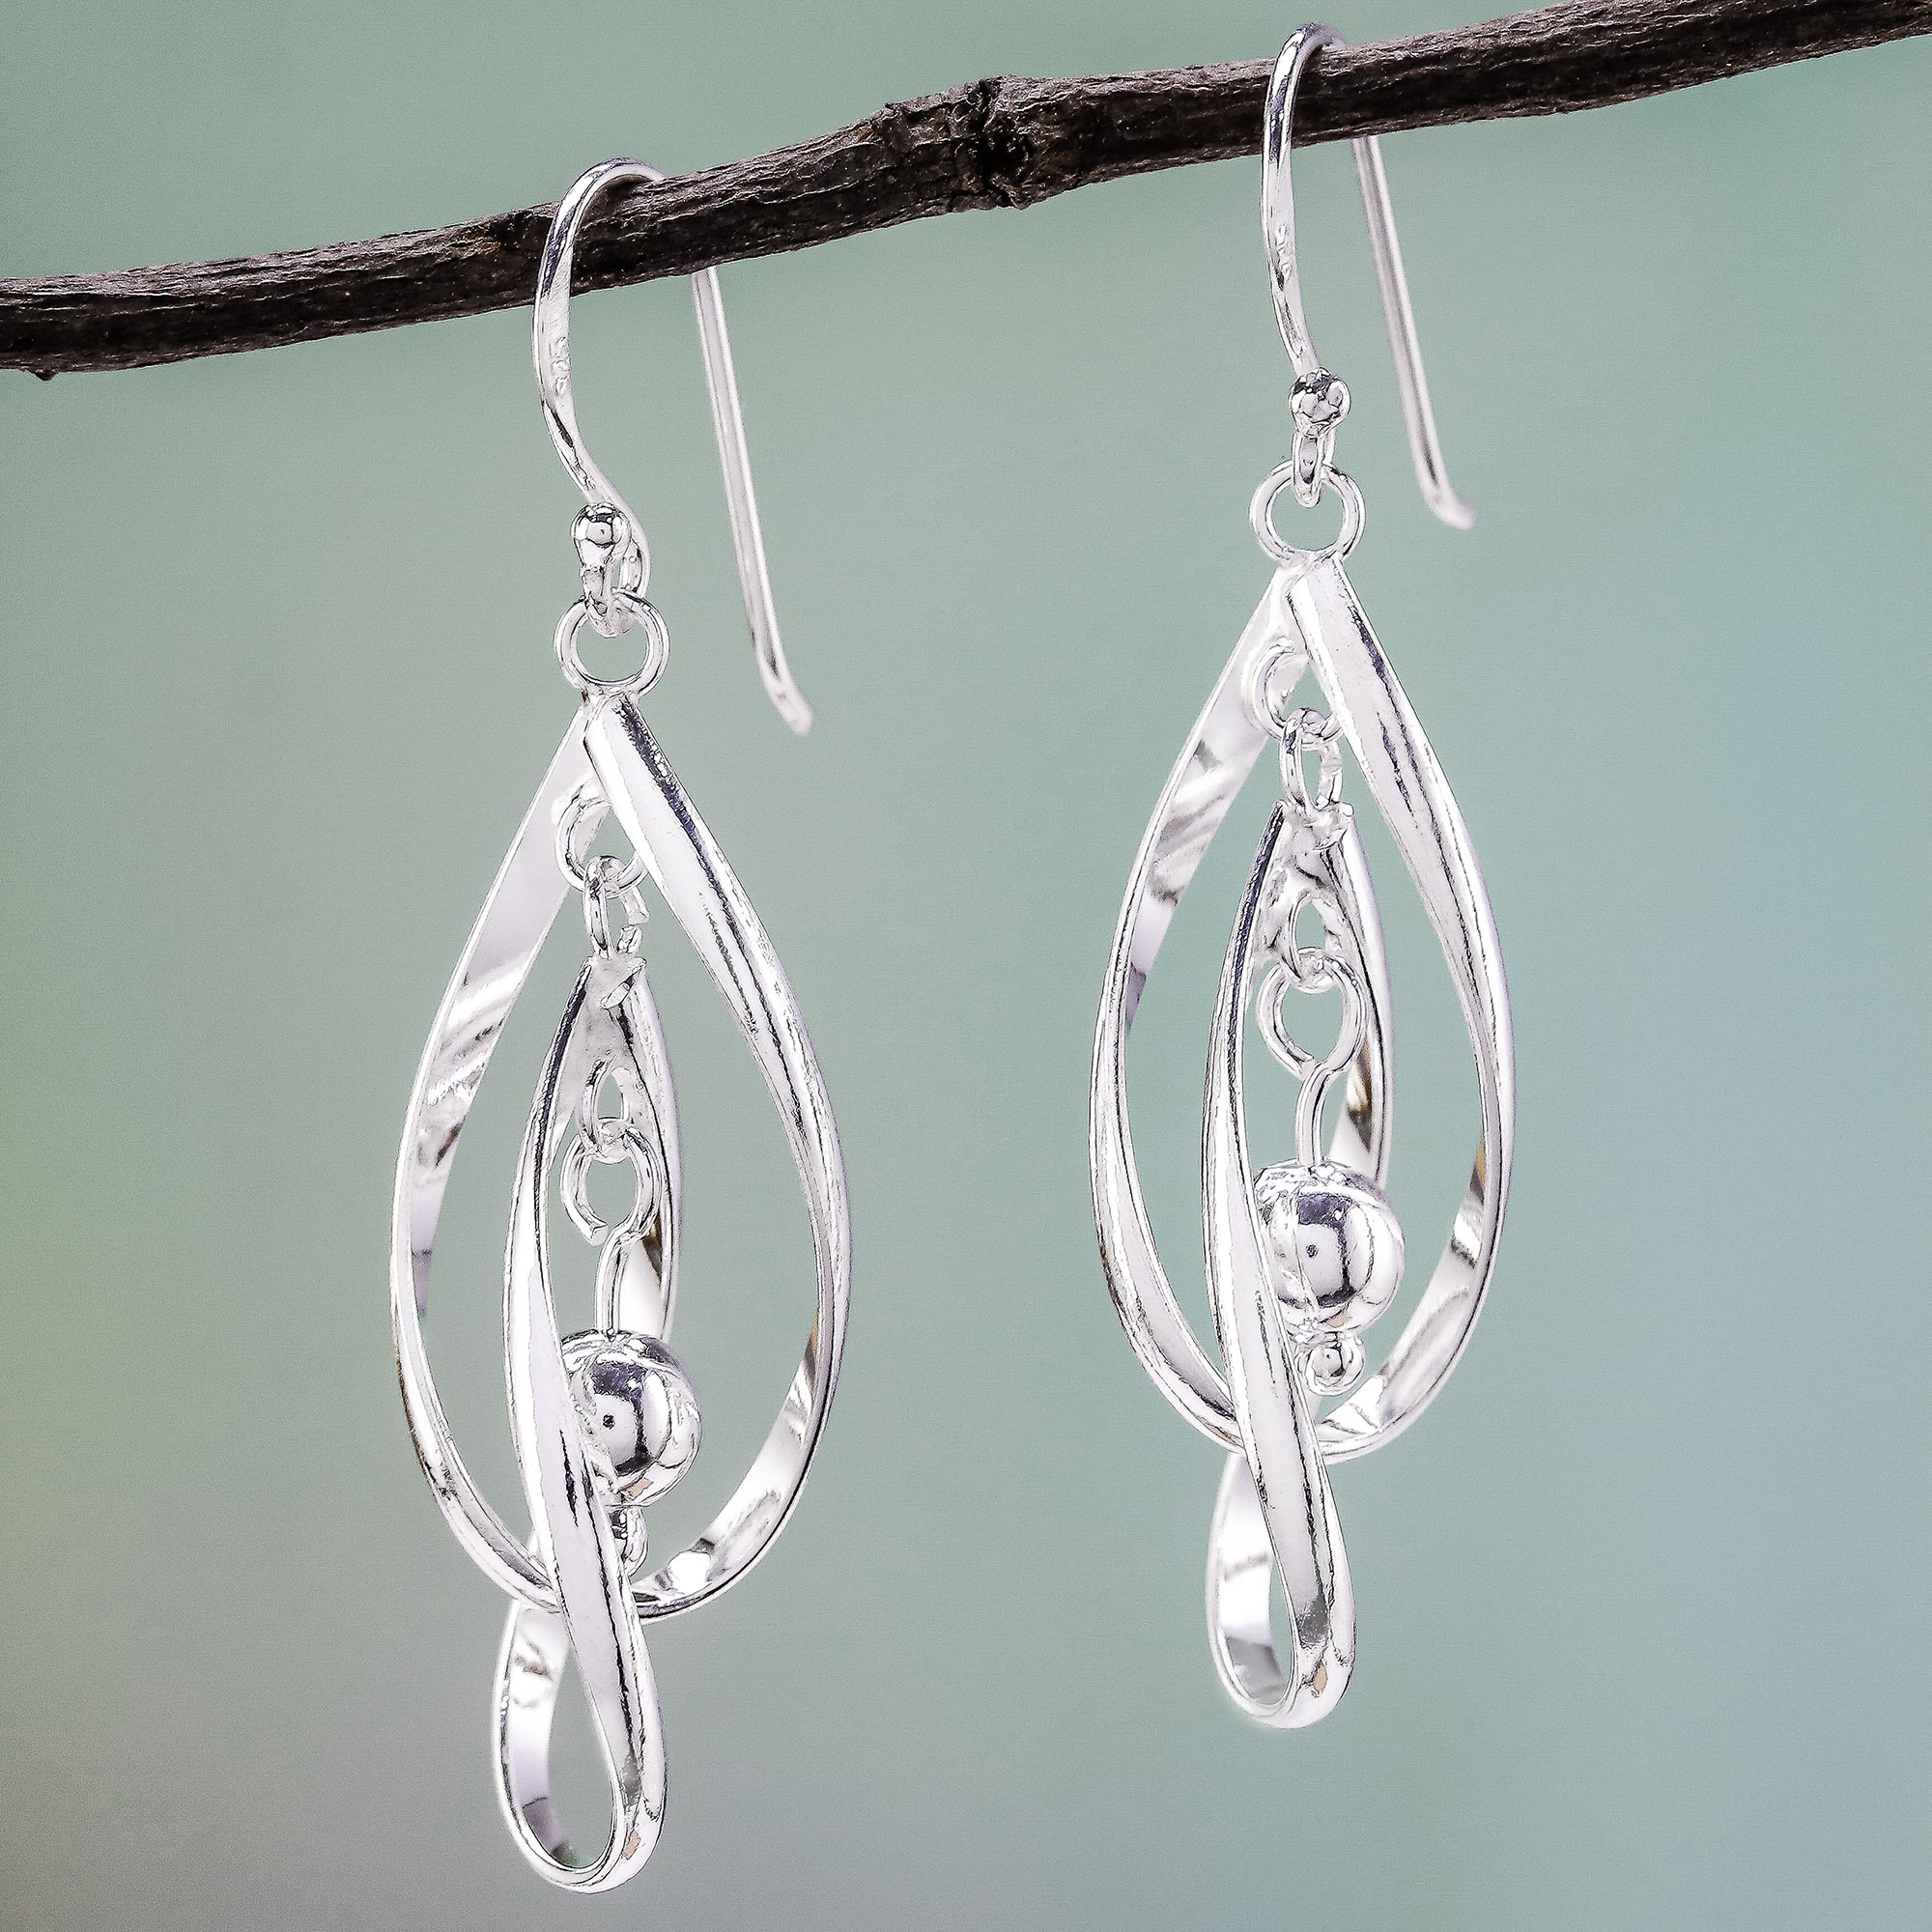 Twisted Sterling Silver Dangle Earrings from Thailand, 'Energetic Spin'